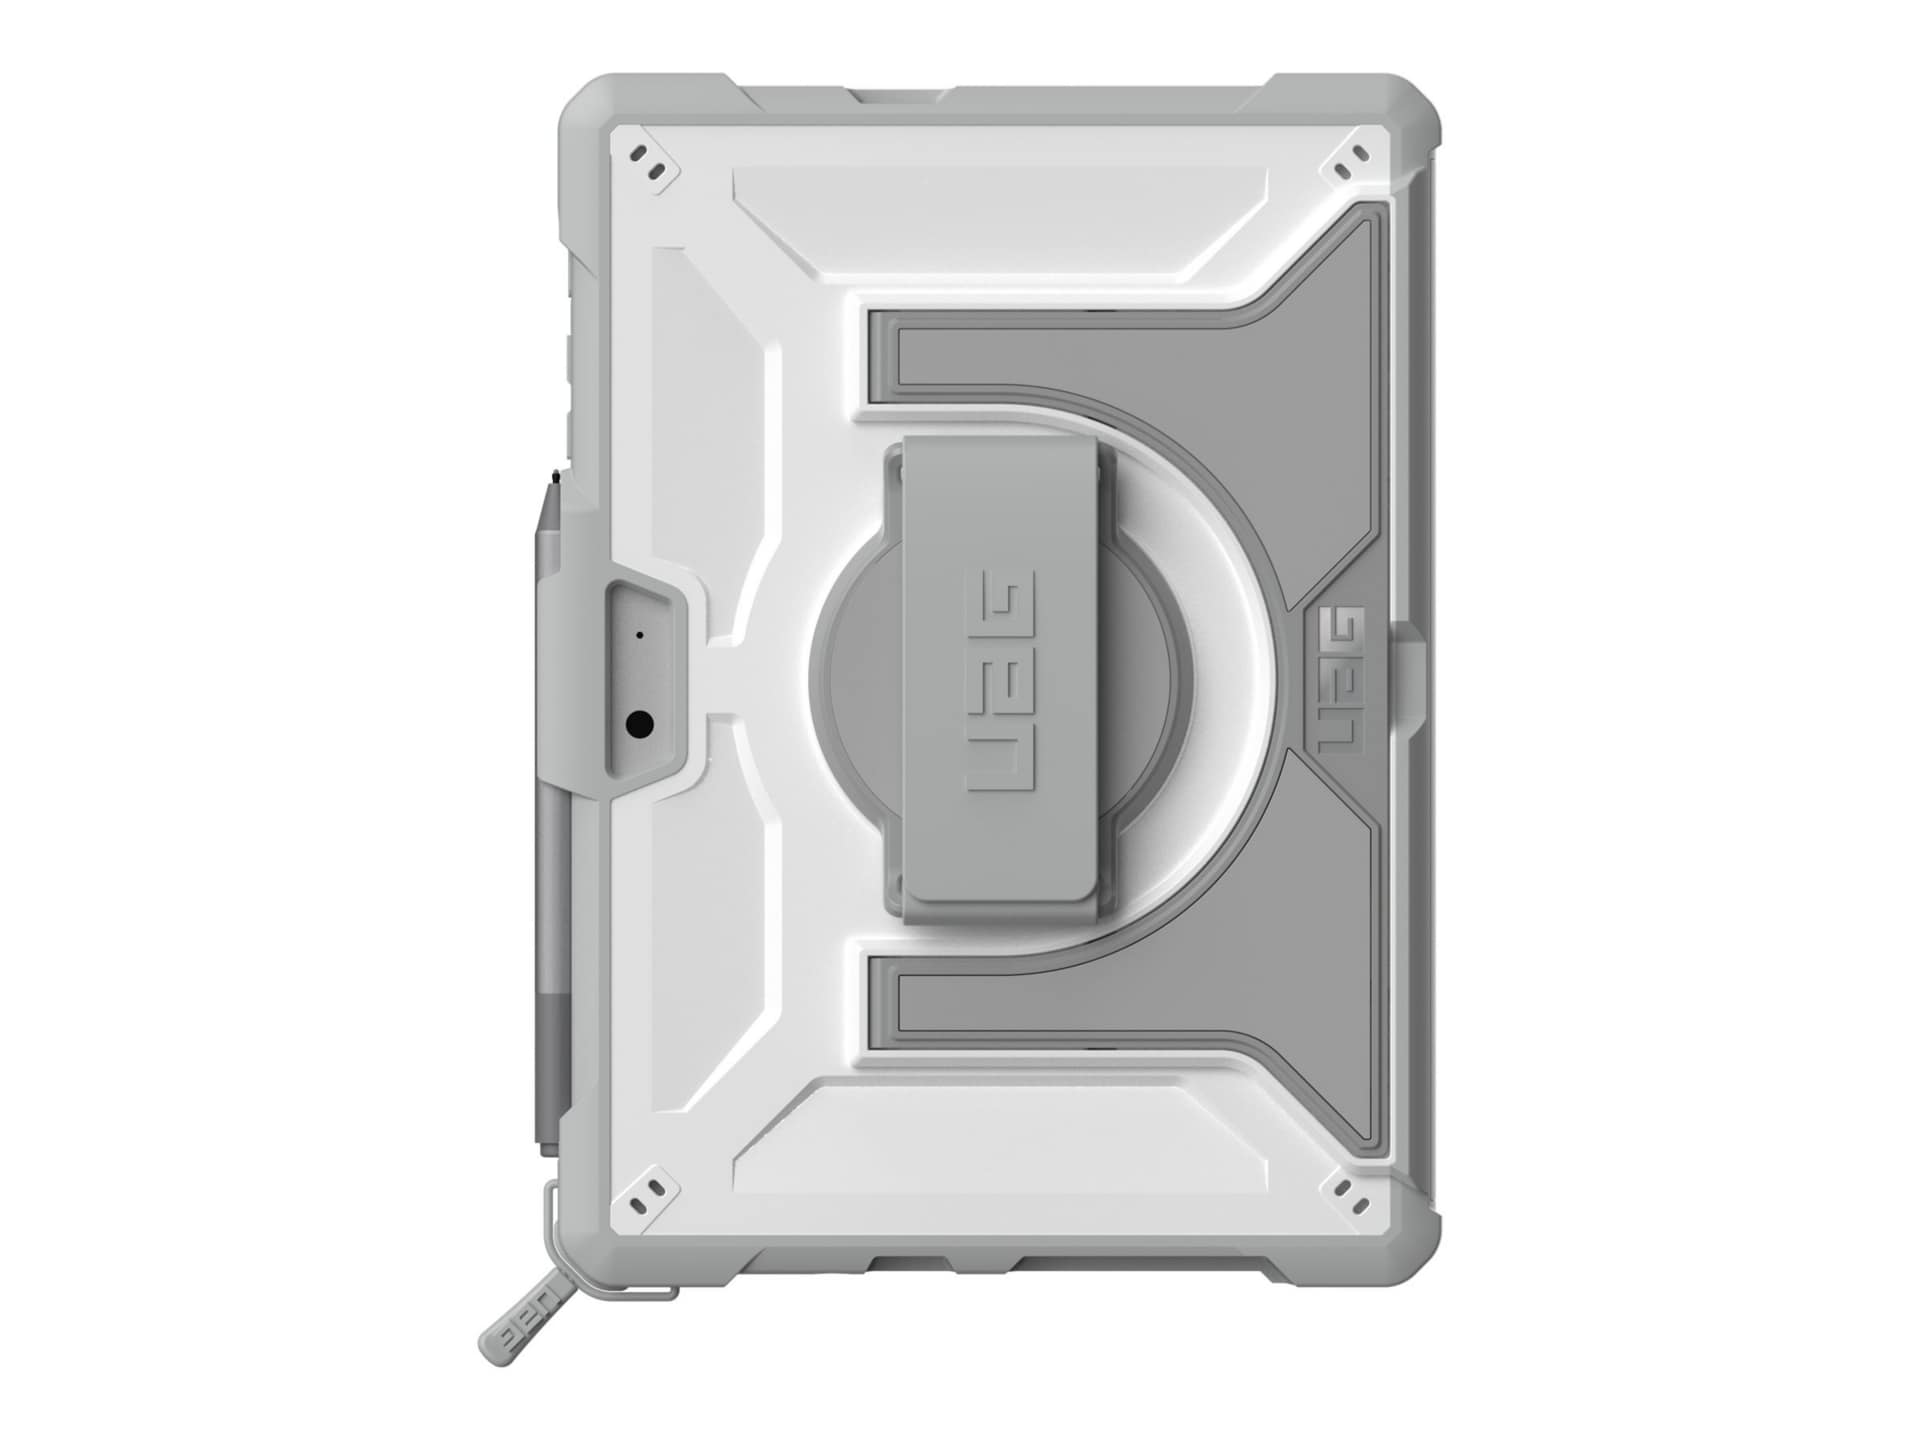 UAG Rugged Case for Surface Pro 7+/7/6/5/LTE/4  -  Plasma Healthcare Series wHandstrap and Shoulder Strap -  White